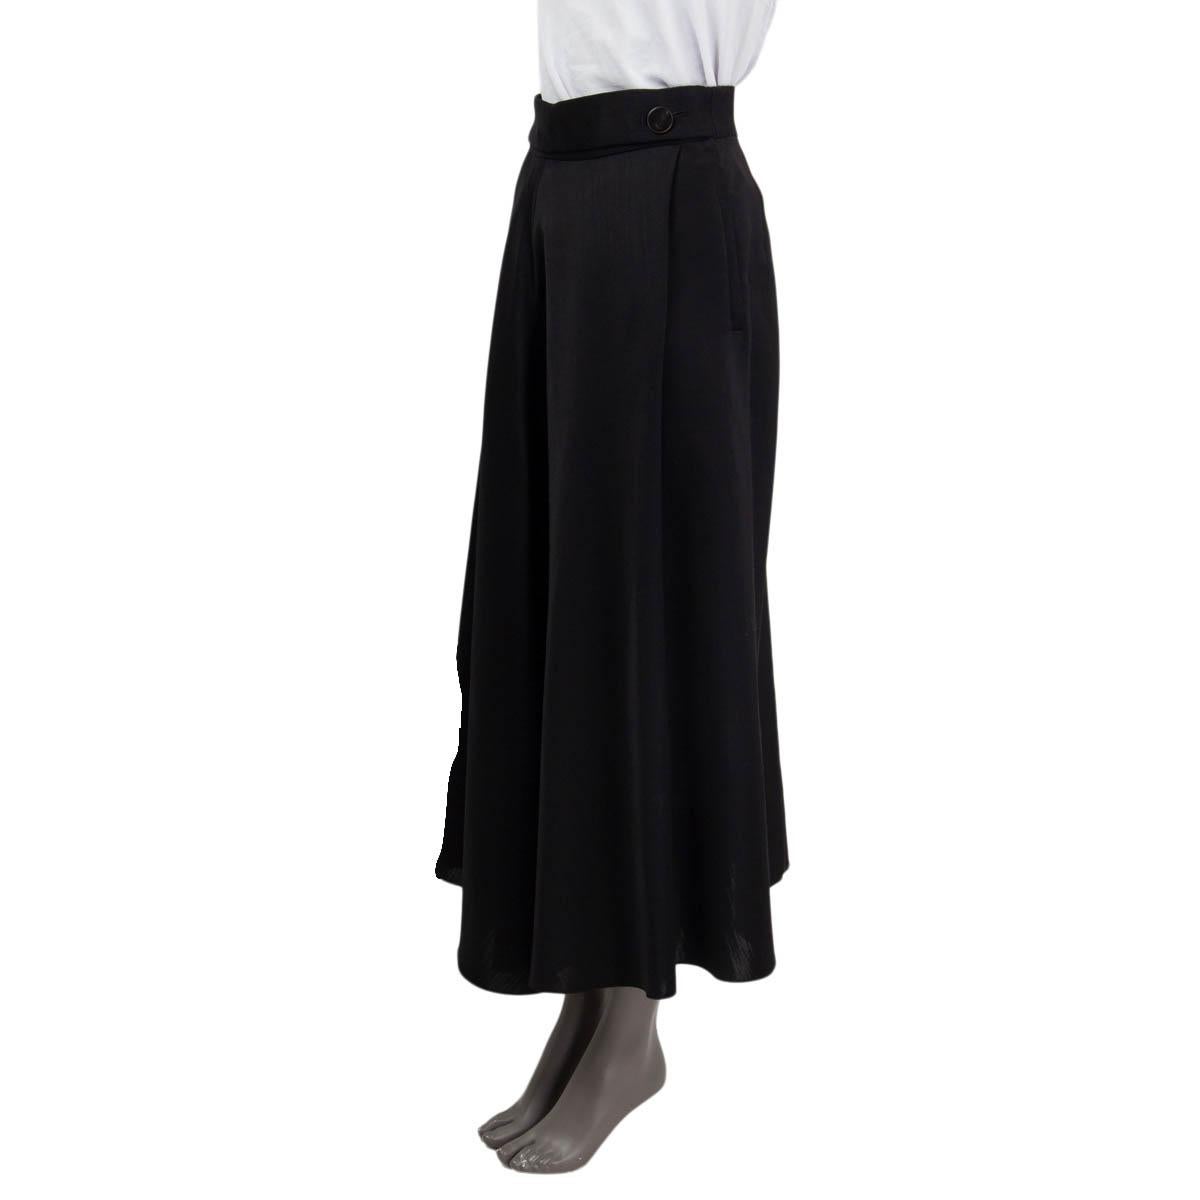 100% authentic Lanvin full length skirt in black wool (80%) and silk (20%). The design features two front pleats with hidden side pockets. Skirt closes with a zipper on the side and two buffalo horn and brass buttons on the each side. Unlined. Has